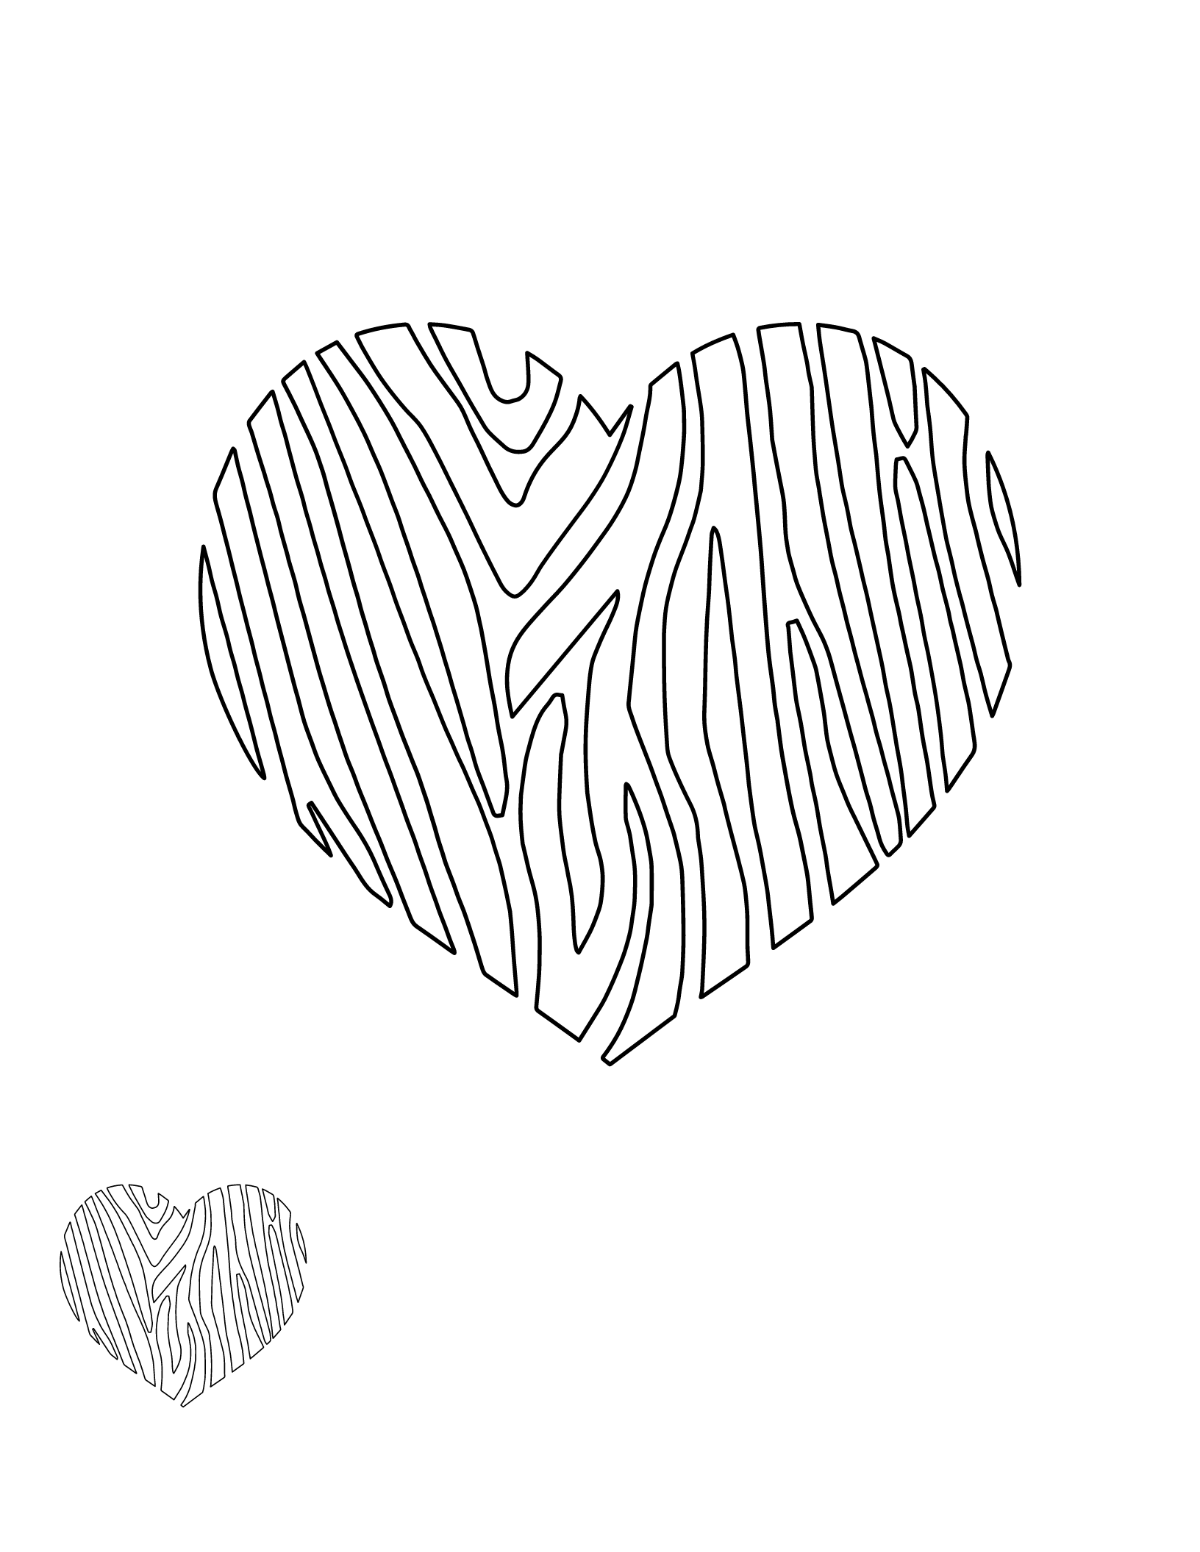 Zebra Heart Coloring Page Template